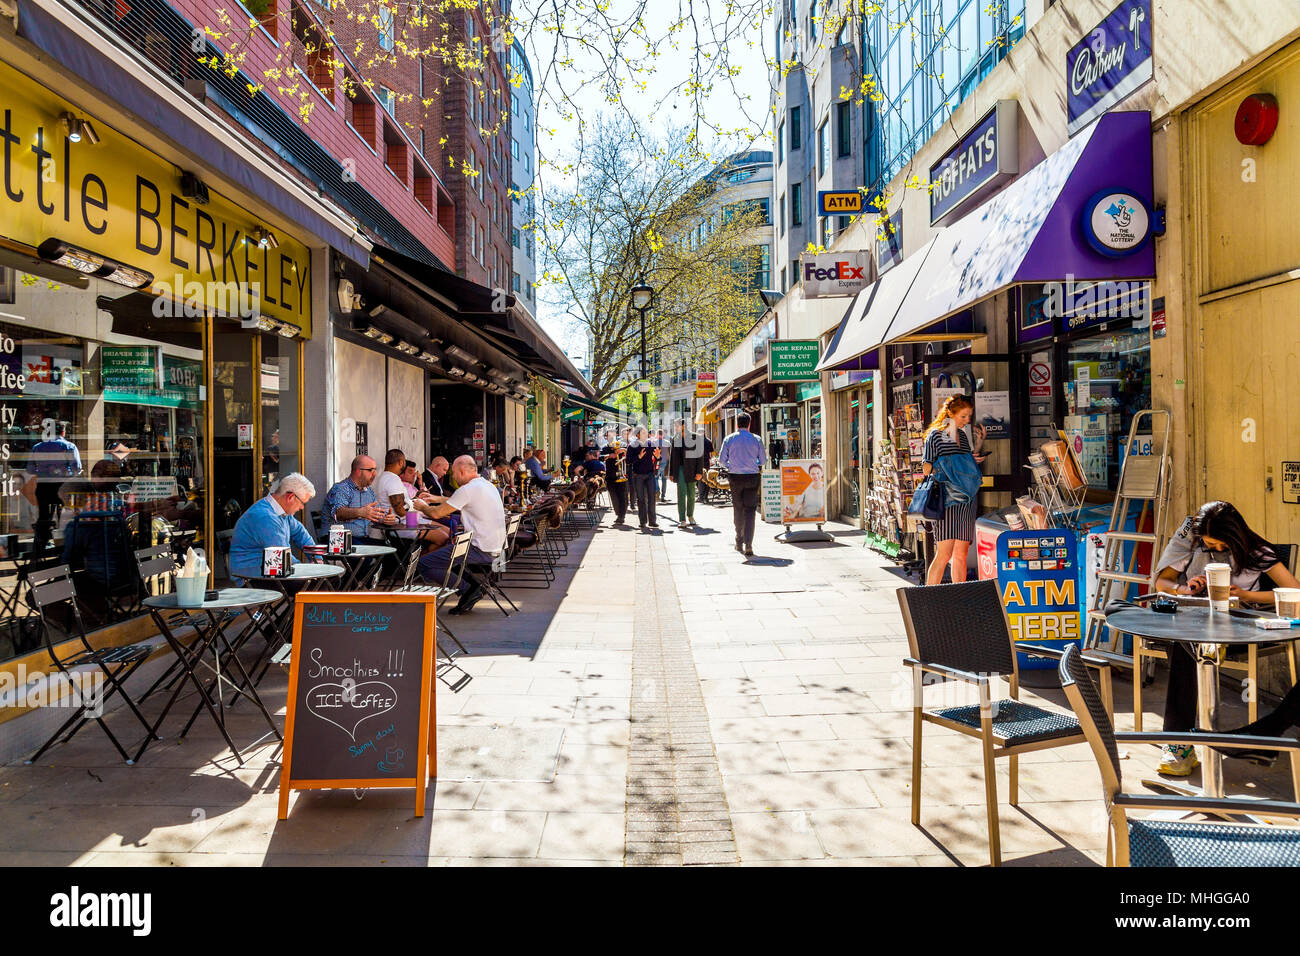 Pedestrian street with al fresco restaurants and cafes in the summer, Lansdowne Row, London, UK Stock Photo